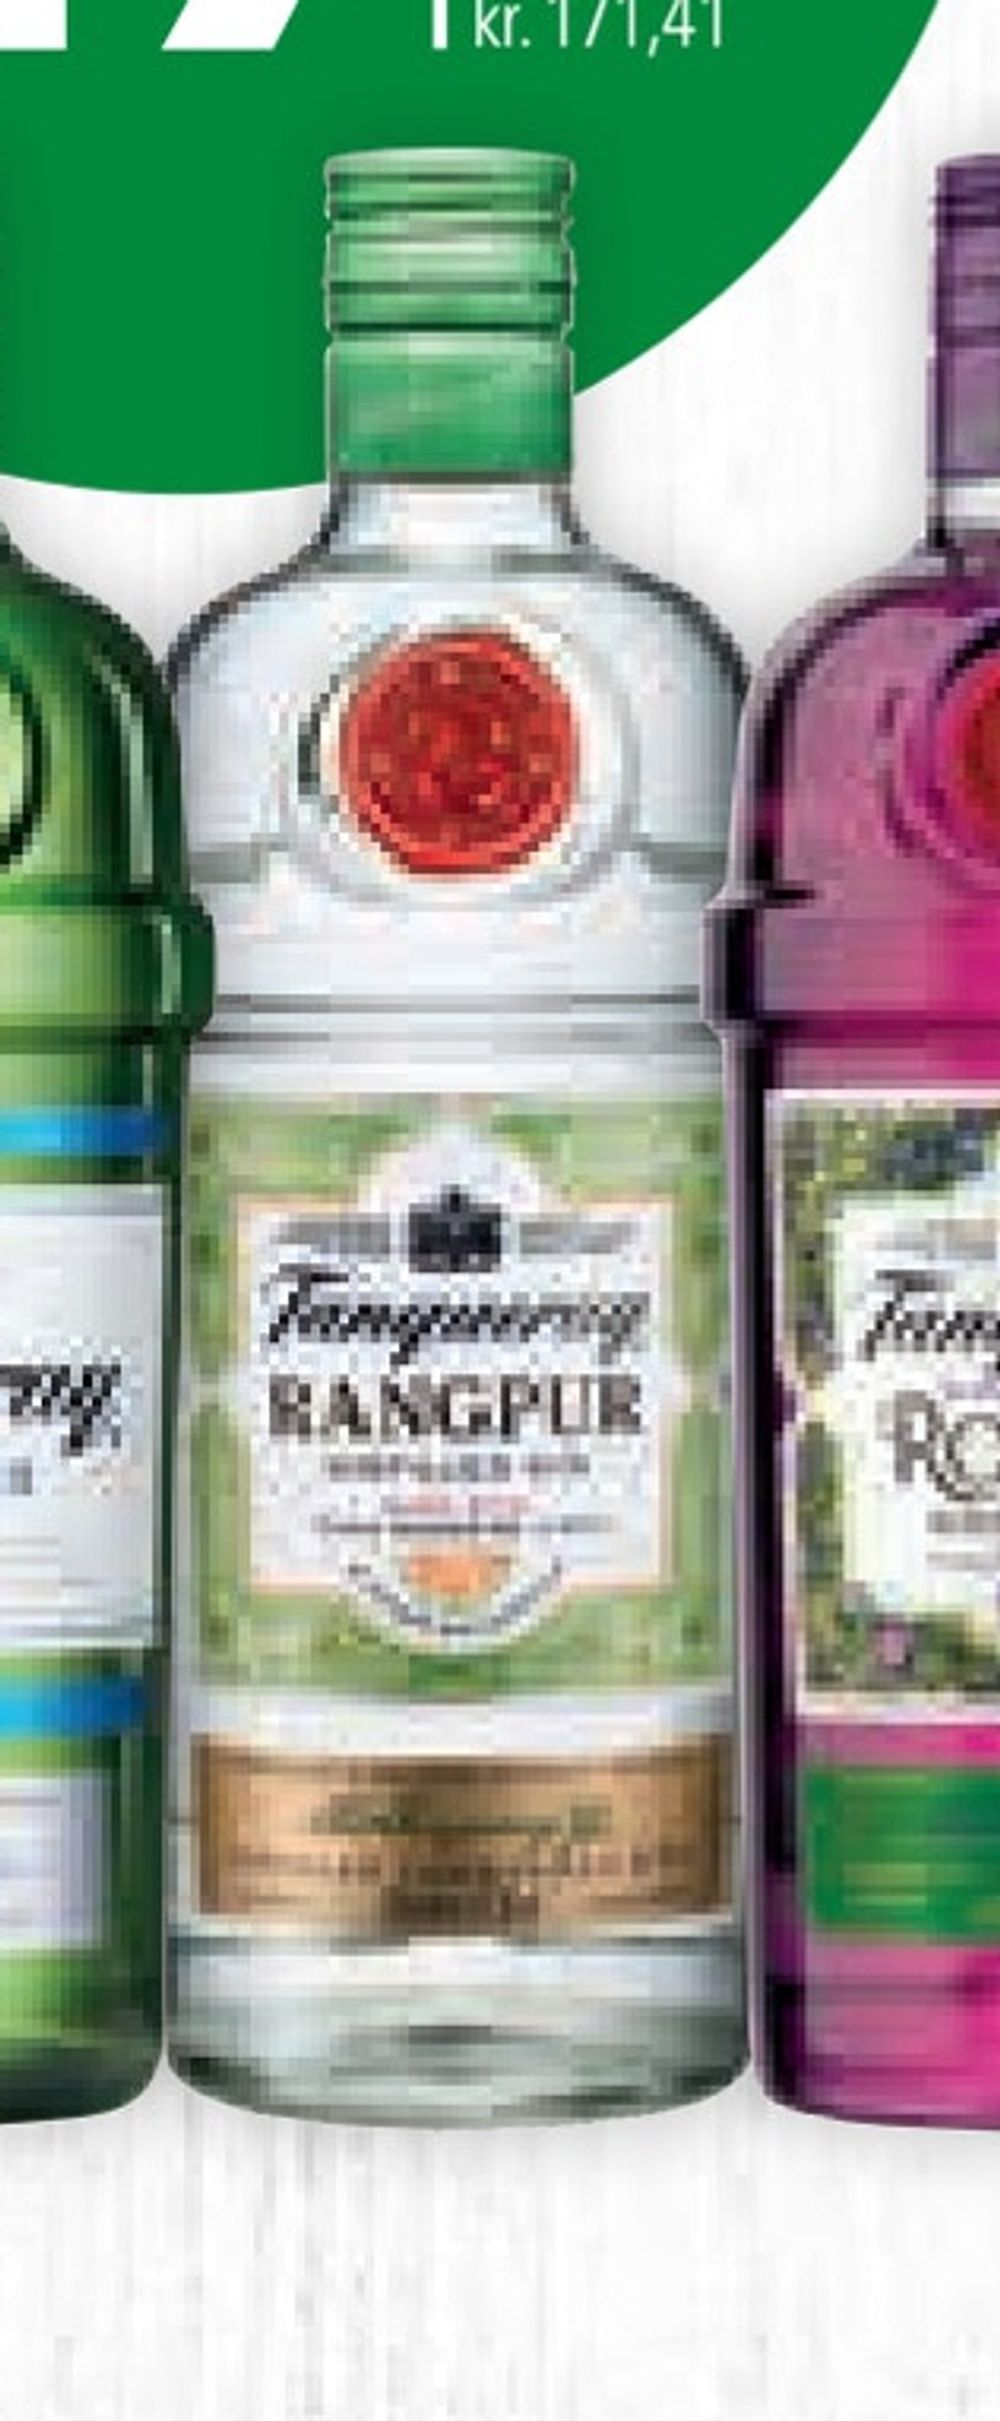 Deals on Tanqueray Rangpur Gin from CITTI at 119,99 kr.